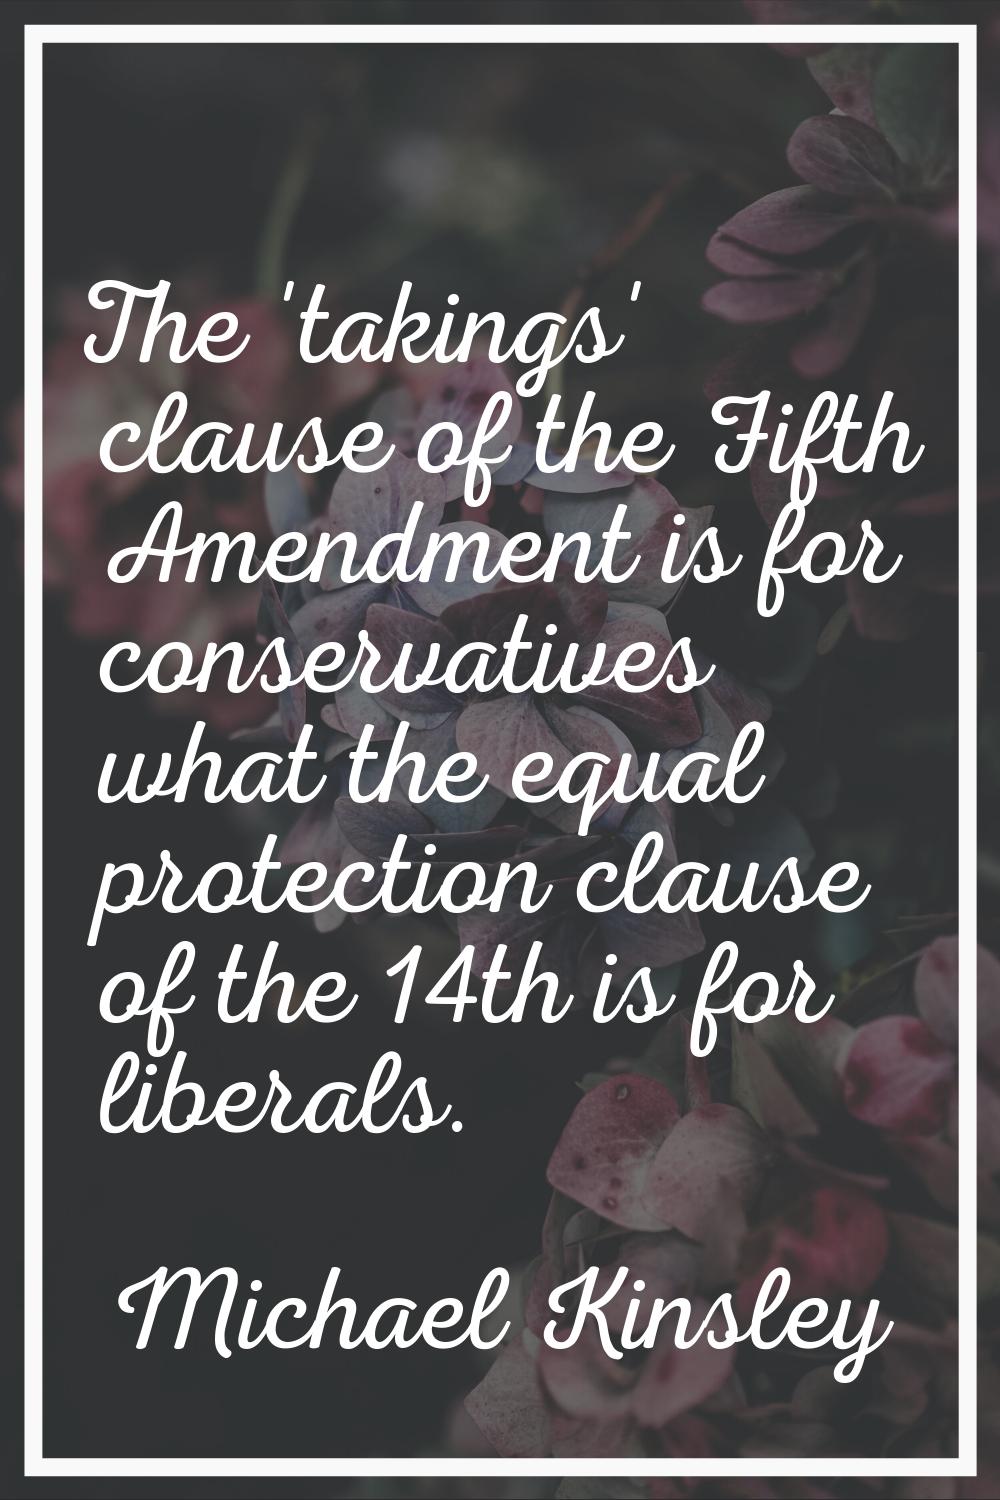 The 'takings' clause of the Fifth Amendment is for conservatives what the equal protection clause o